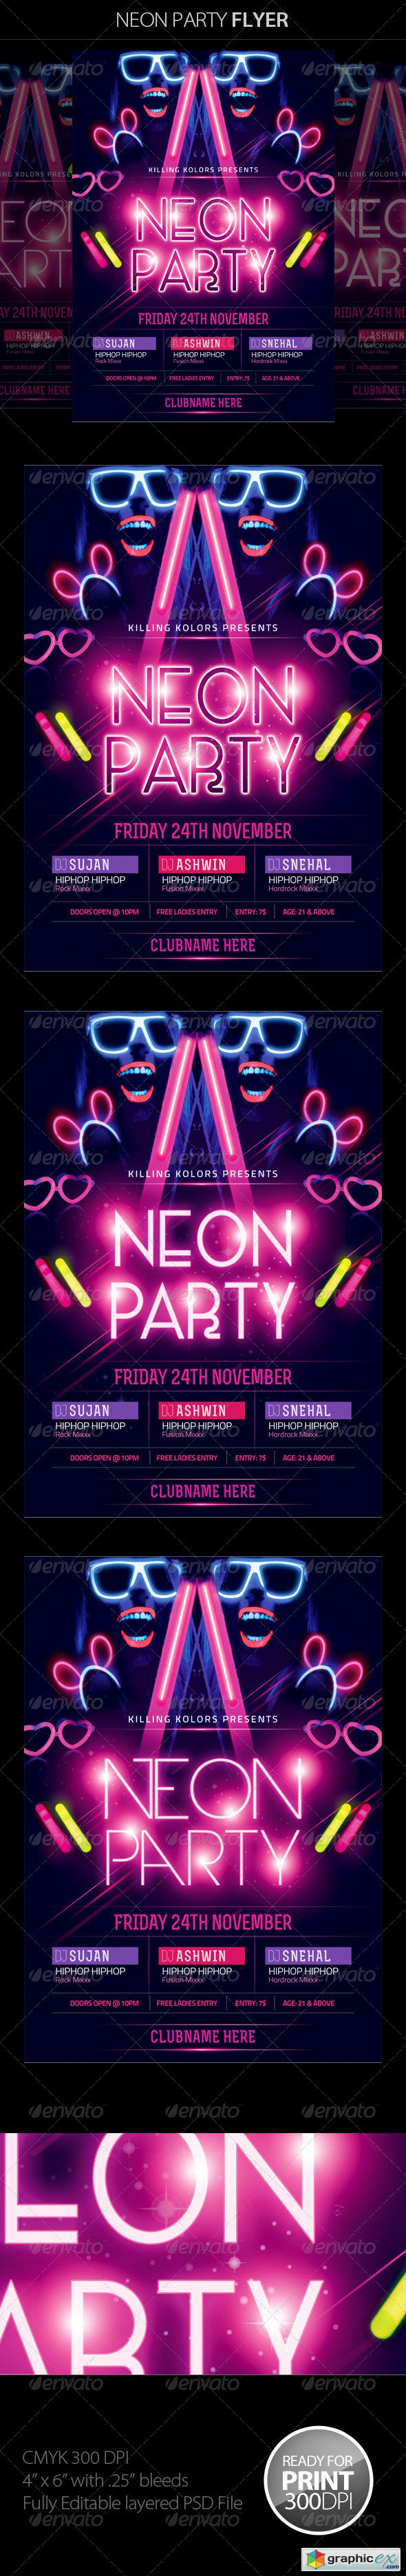 Neon / Glow Party Flyer